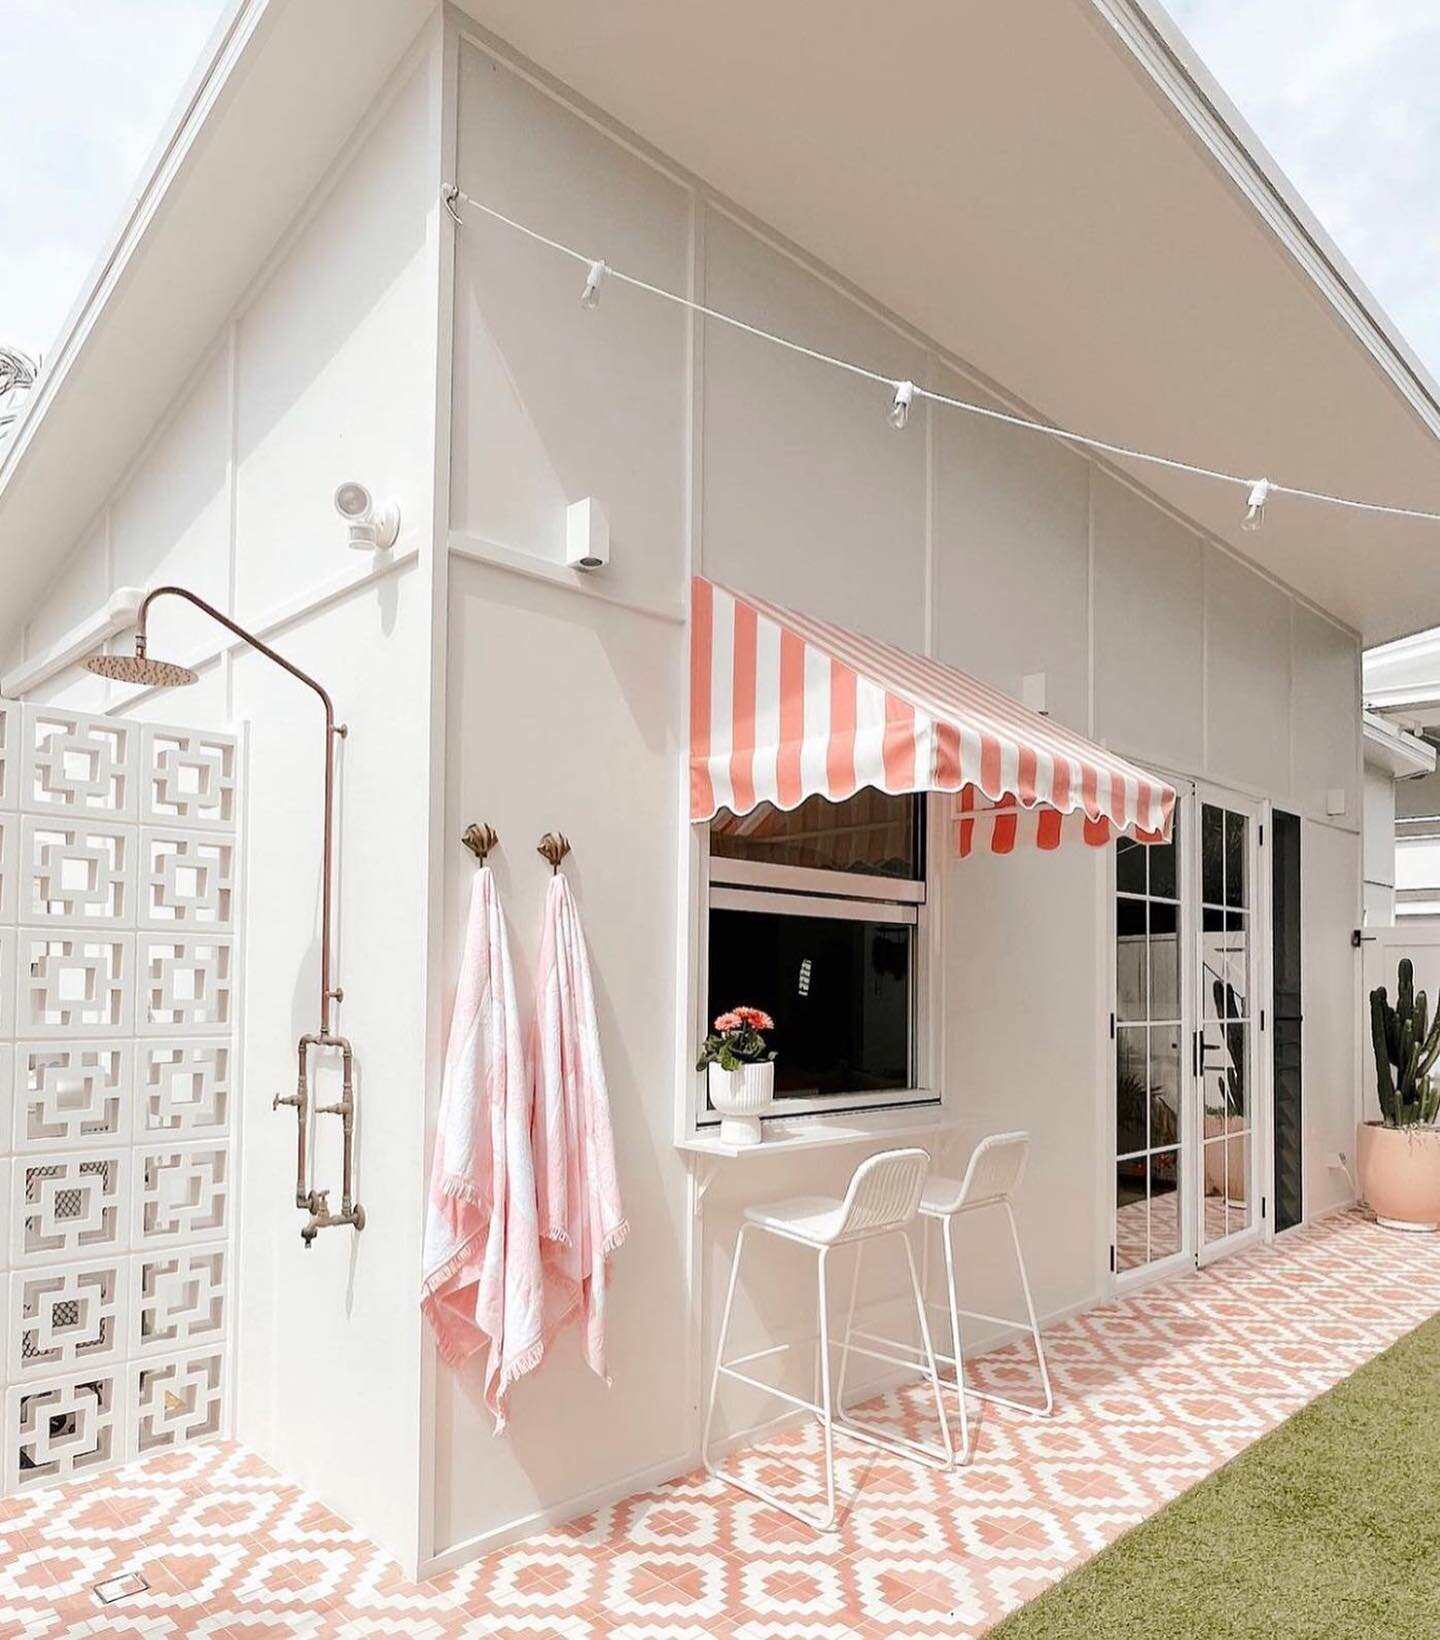 Stay Awhile @thecabana_casuarina 🌴 A super cute, brand new beach bungalow with a fun retro vibe.
Enter through a hidden pink door, inside you&rsquo;ll find a total dreamscape for a romantic getaway - think colorful tiles, super stylish decor, and a 